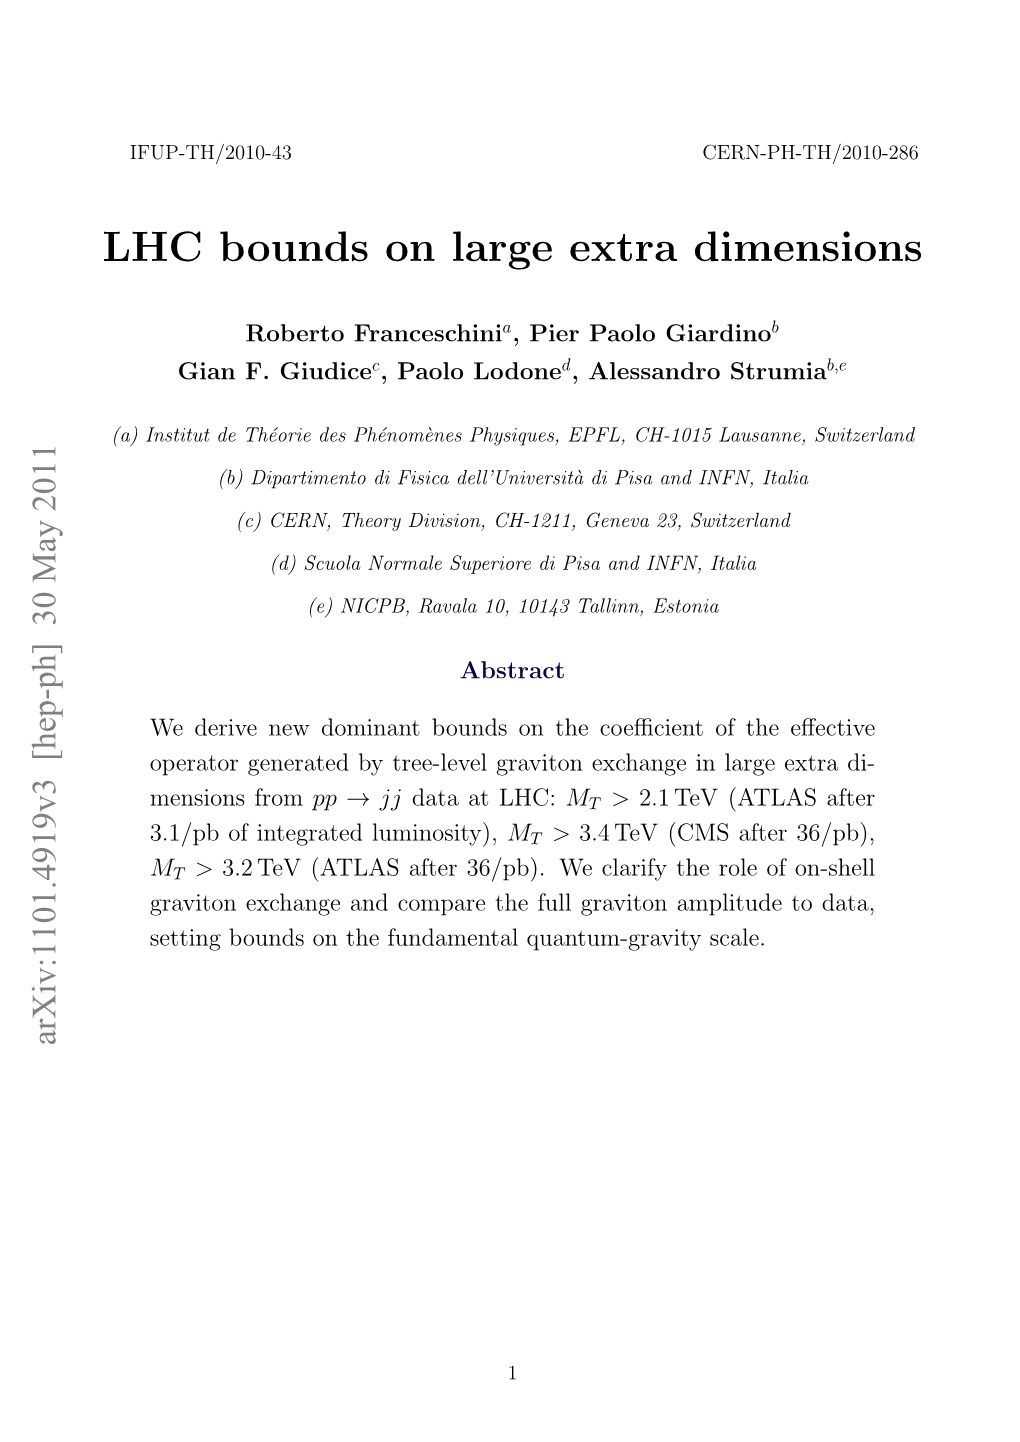 LHC Bounds on Large Extra Dimensions